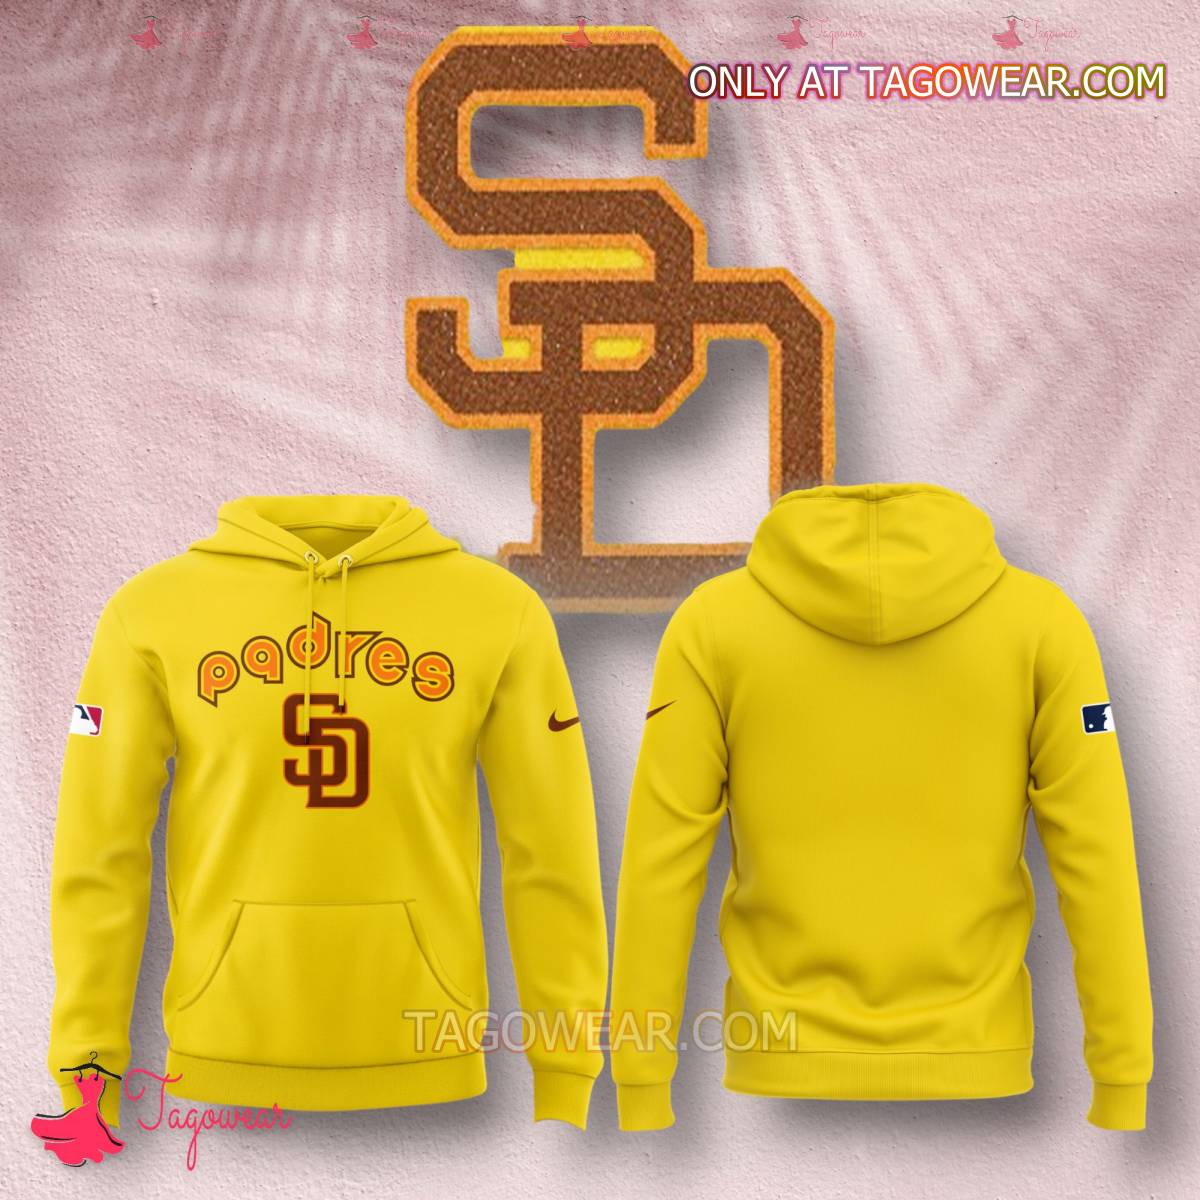 ‘84 Champs Diego Padres Yellow Hoodie